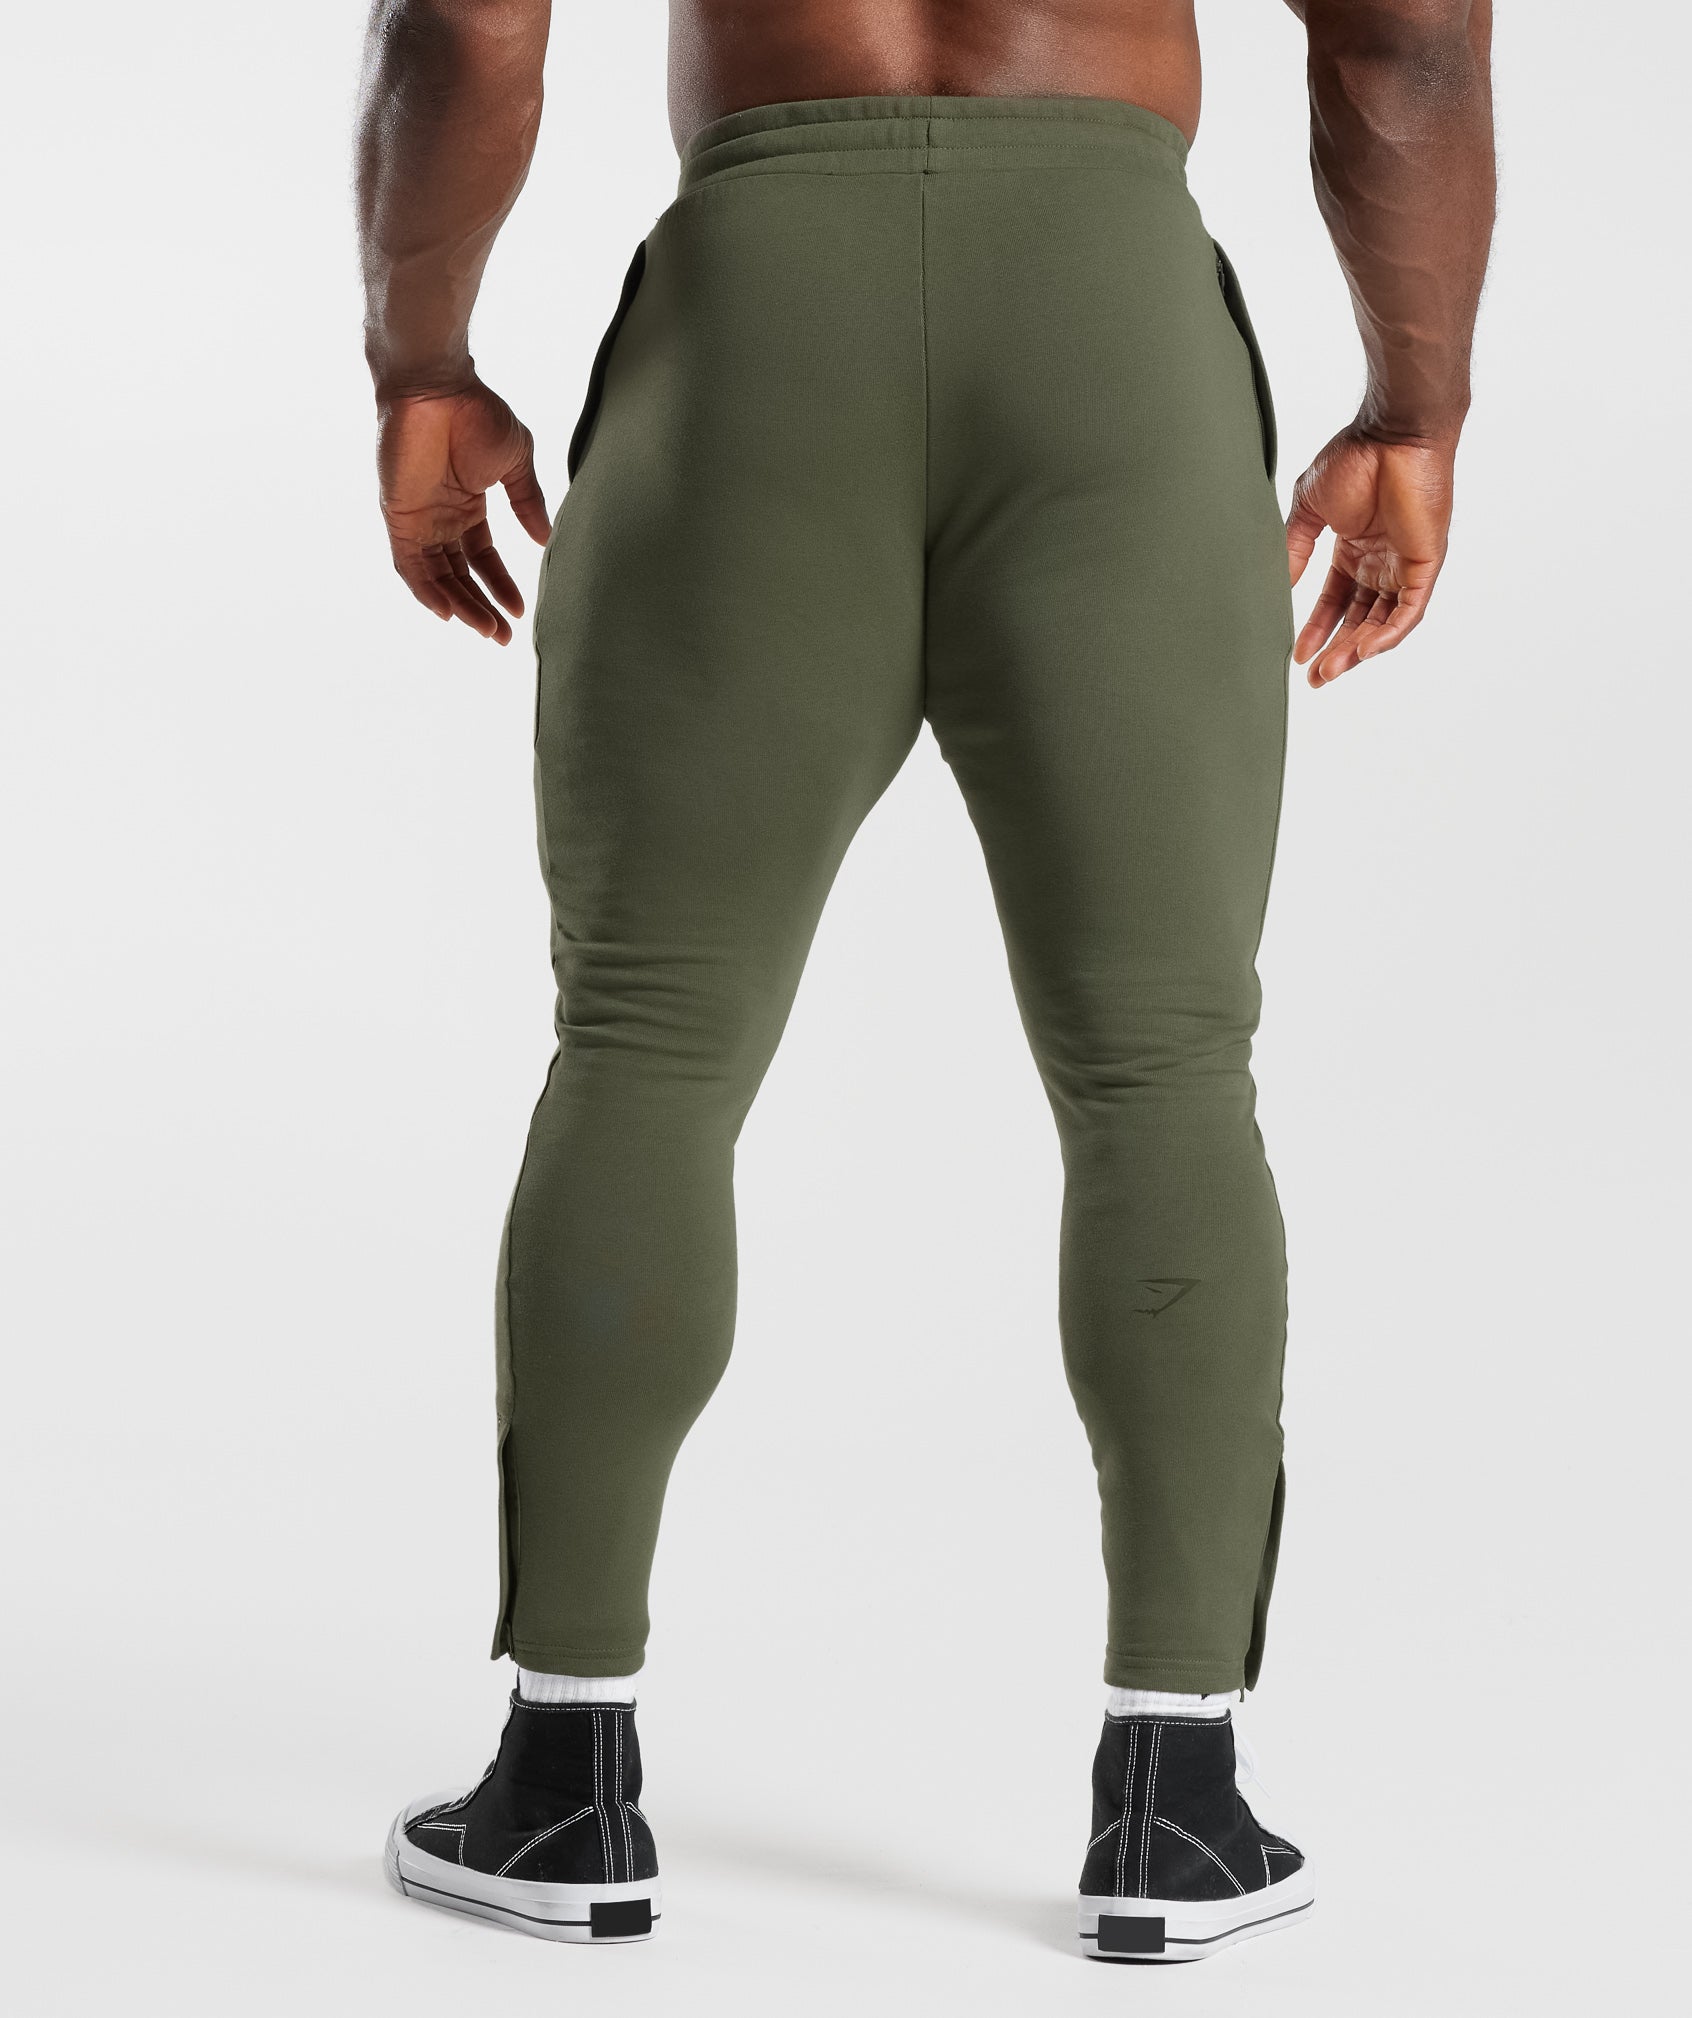 Apollo Muscle Fit Joggers in Core Olive - view 2